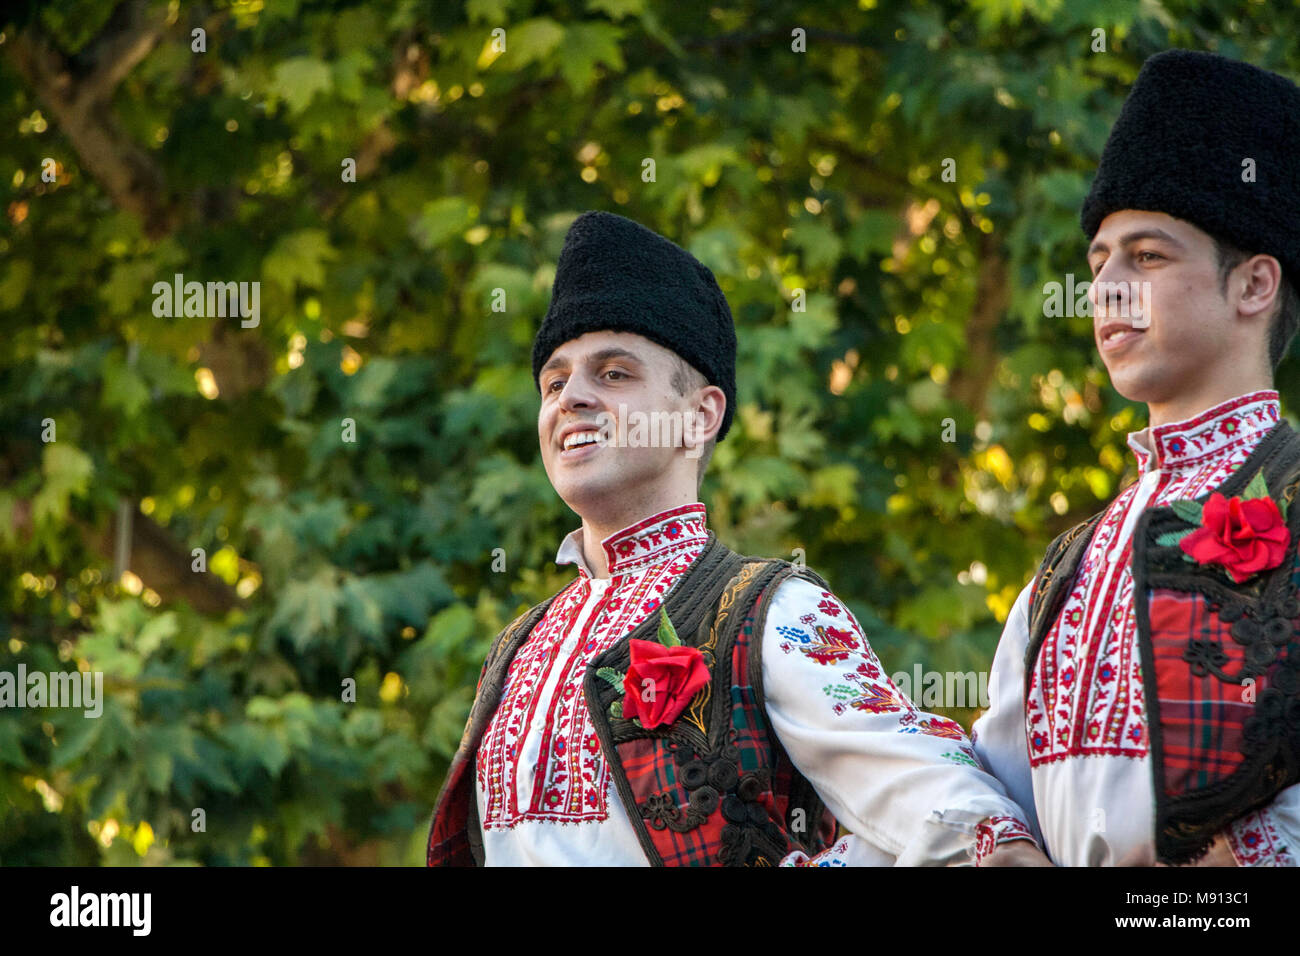 Plovdiv, Bulgaria 3 August 2013: Male dancers in Bulgarian national costumes are performing on stage of the XIX International Folklore Festival. Stock Photo